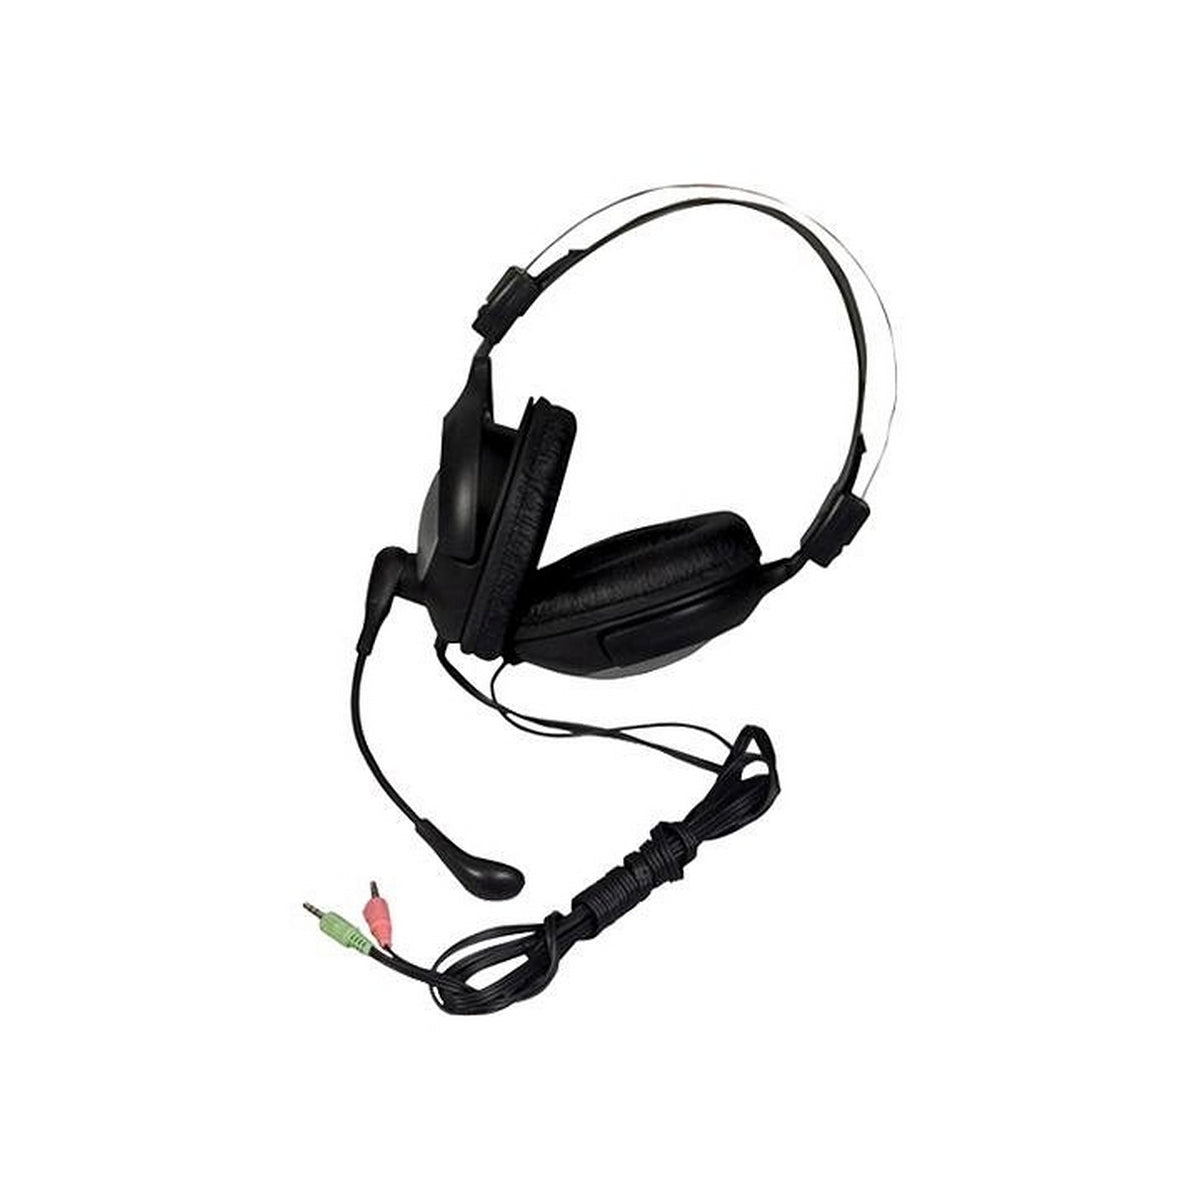 Yamaha LC2 CM500 | Headset with Built-in Microphone